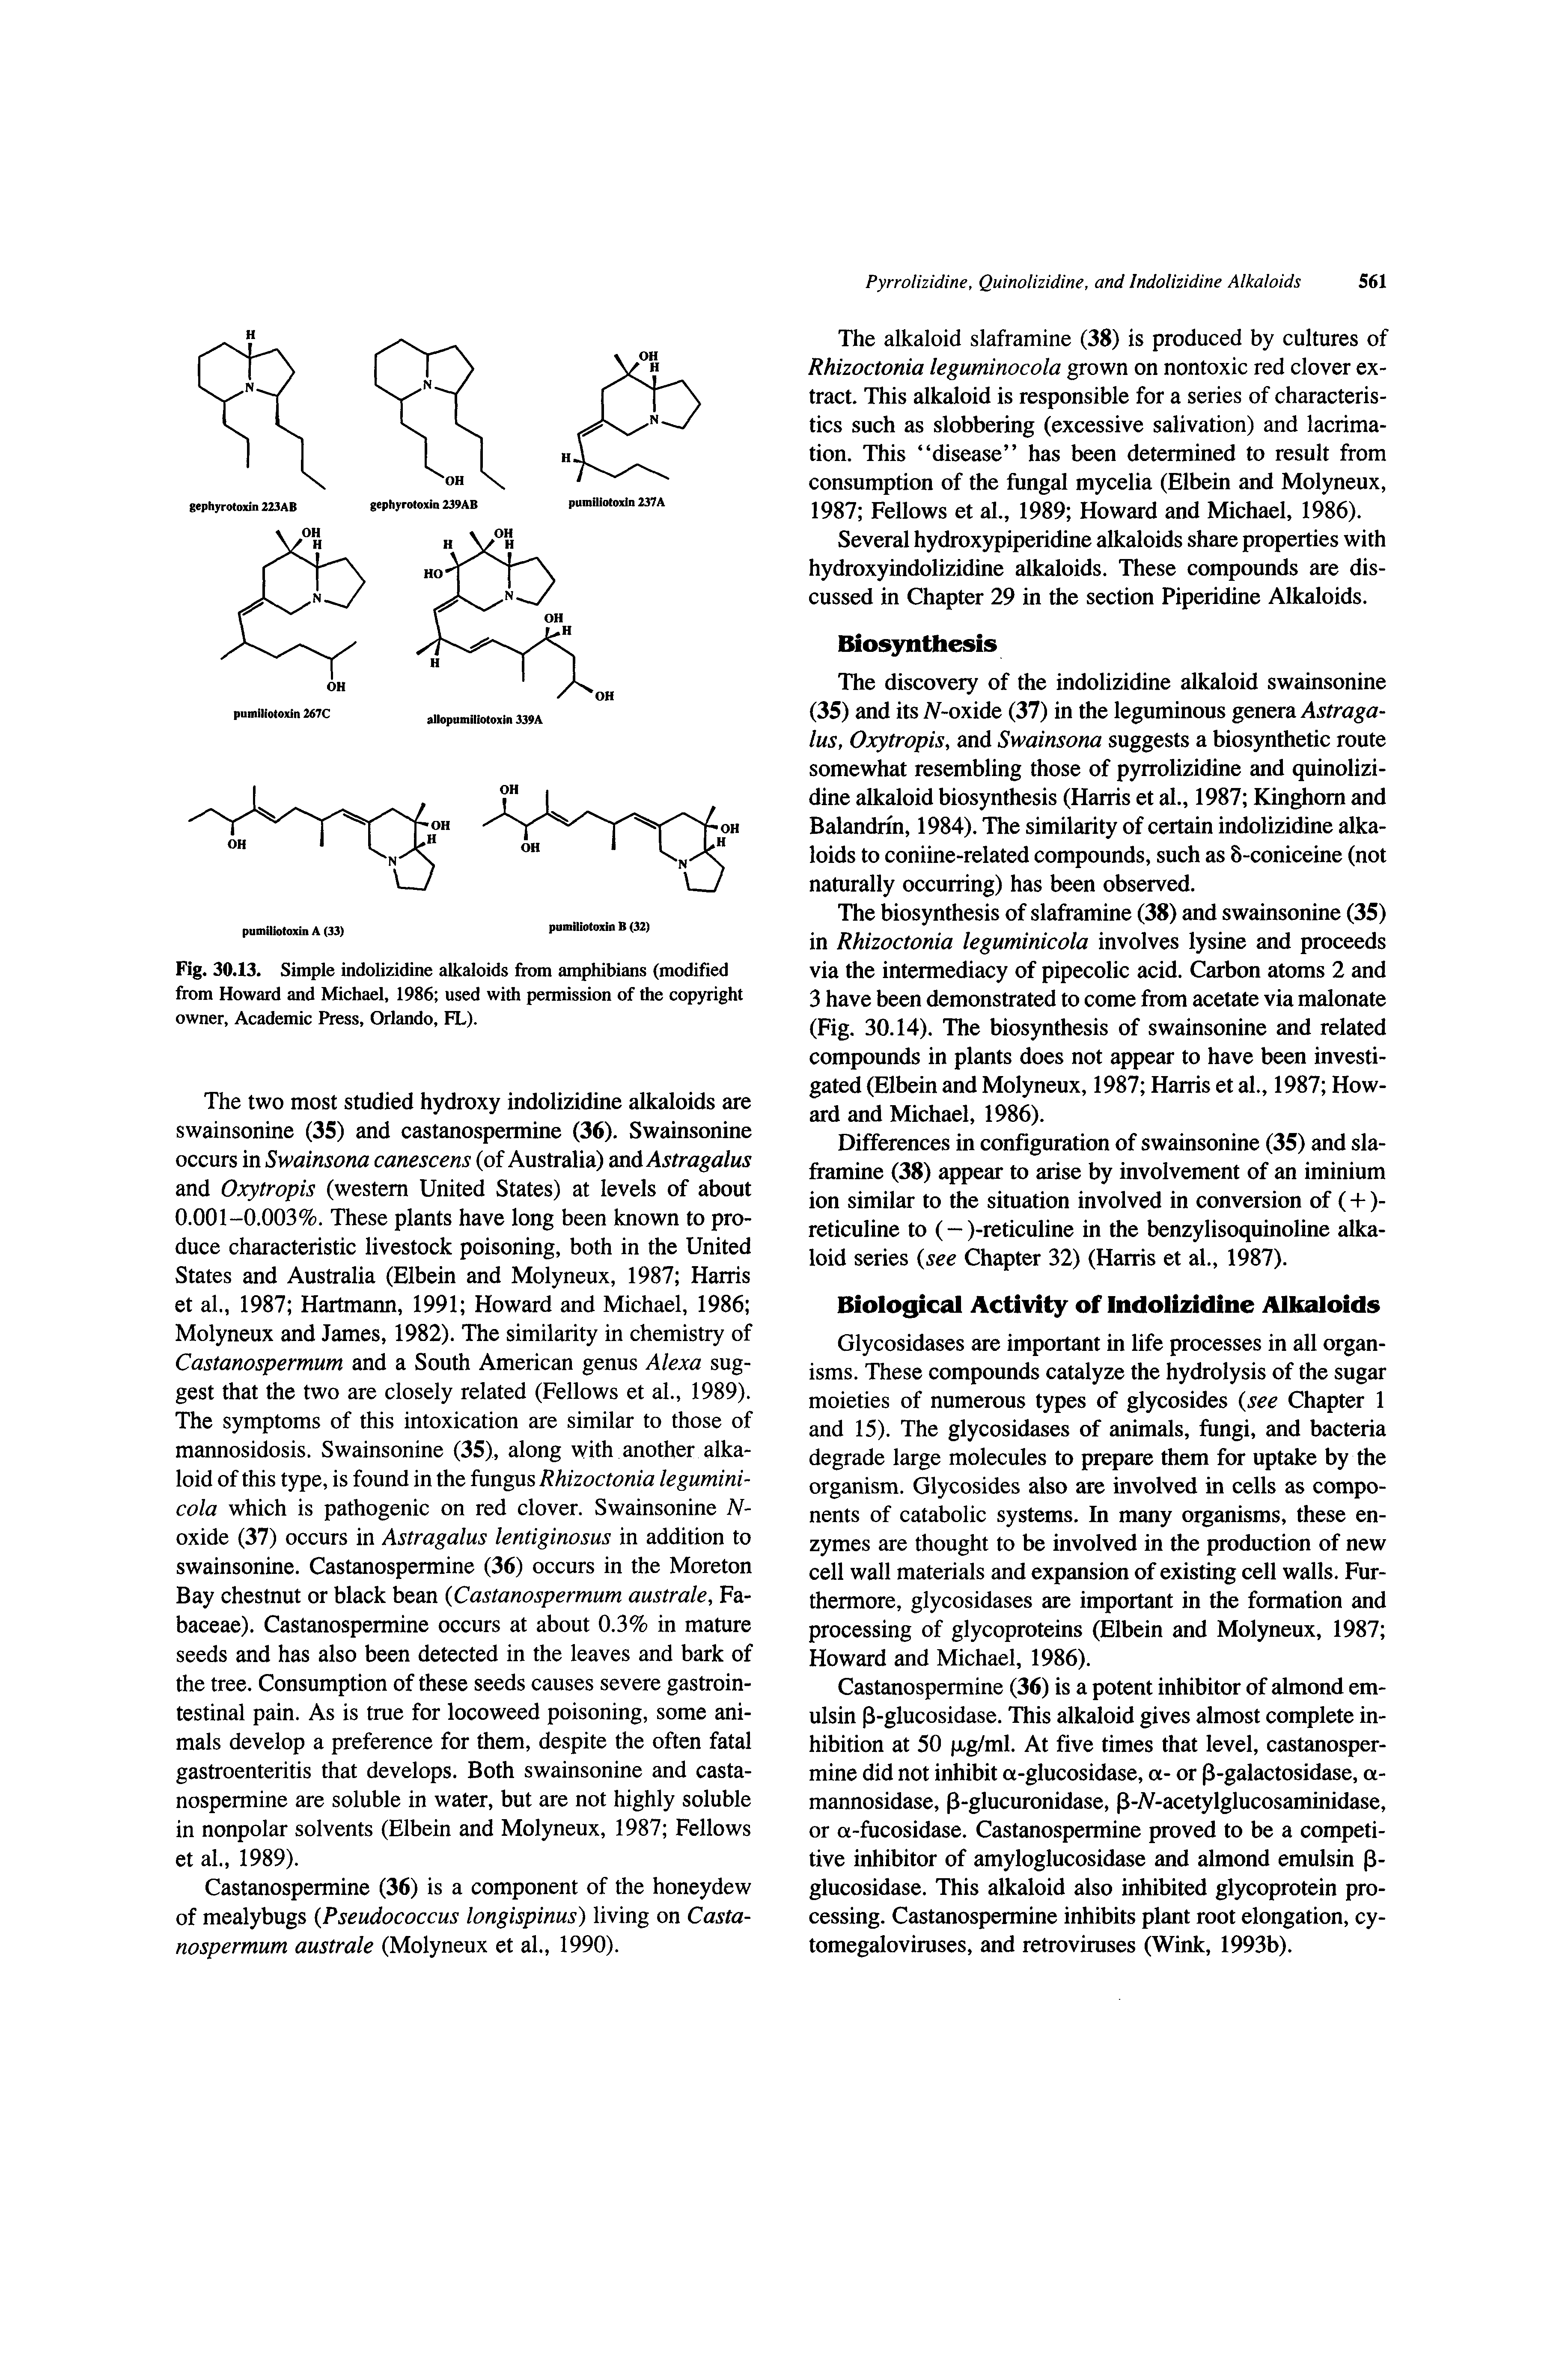 Fig. 30.13. Simple indolizidine alkaloids from amphibians (modified from Howard and Michael, 1986 used with permission of the copyright owner. Academic Press, Orlando, FL).